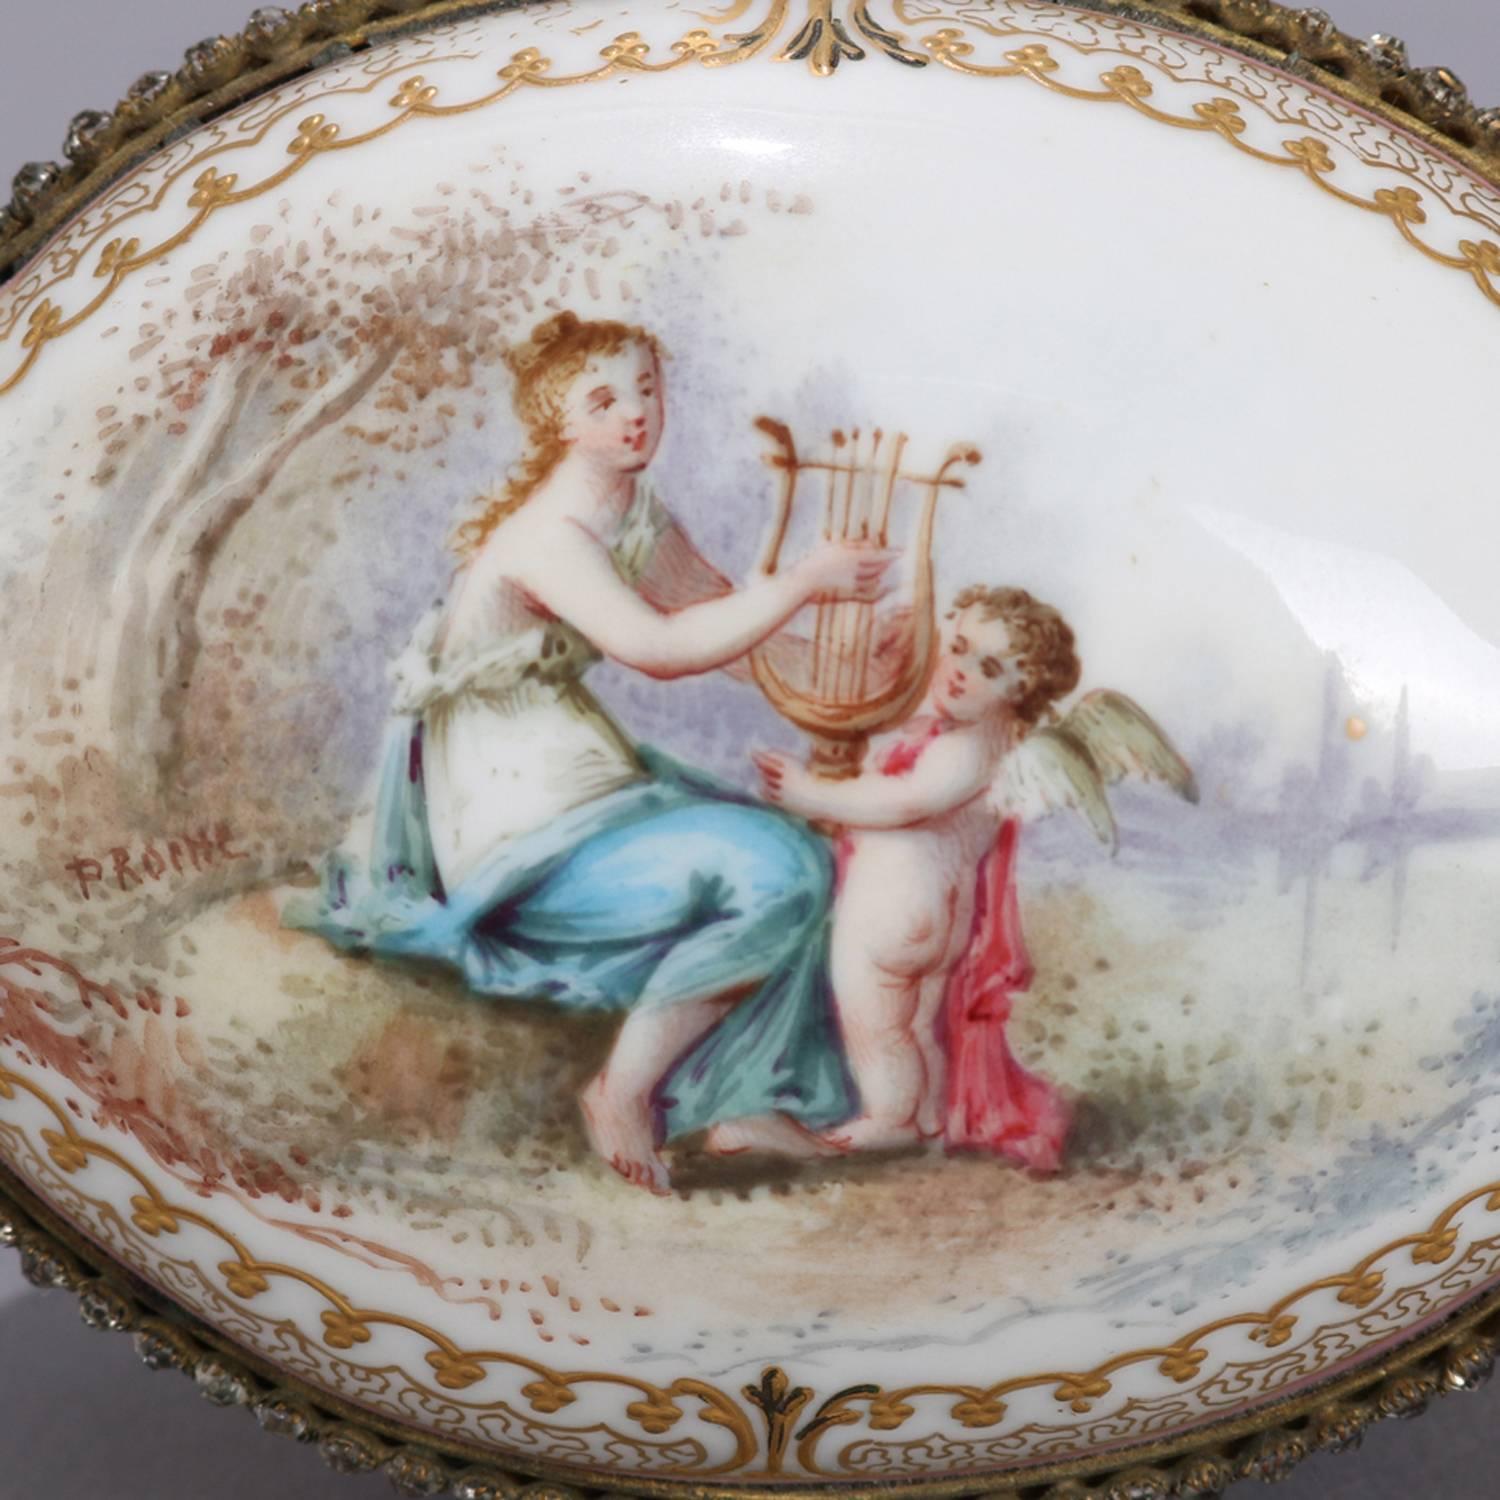 Meissen School hand-painted porcelain oval dresser box features egg form with central Classical scene with all-over floral and gilt decoration and bronze mounts, interior with floral reserves, signed P ROCHE, marked on base, 20th